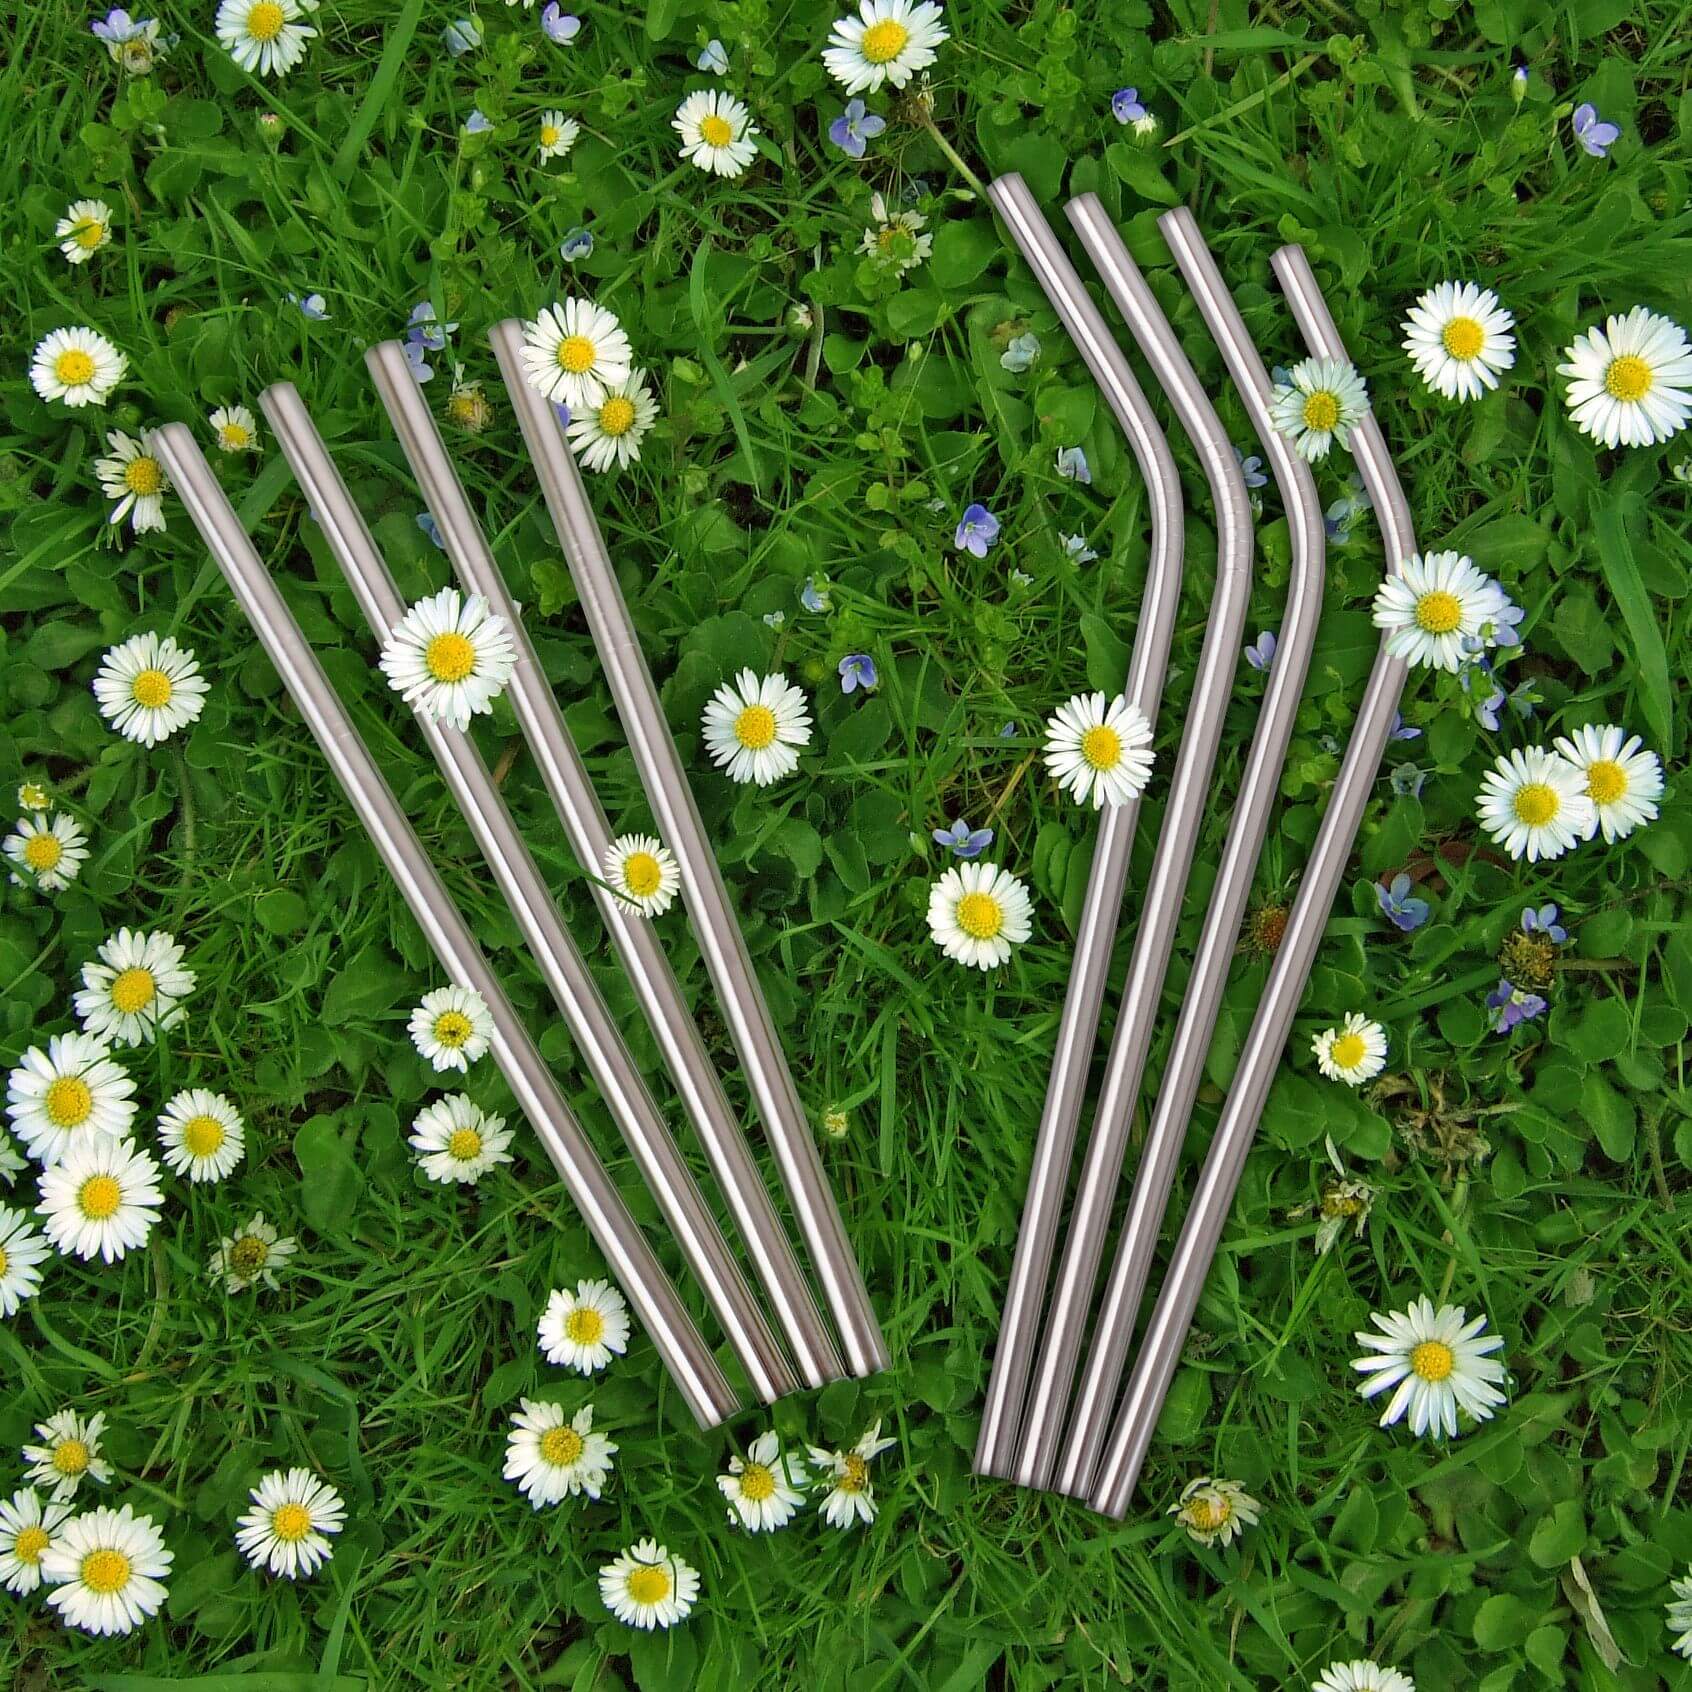 Stainless steel reusable straws on grass with yellow flowers